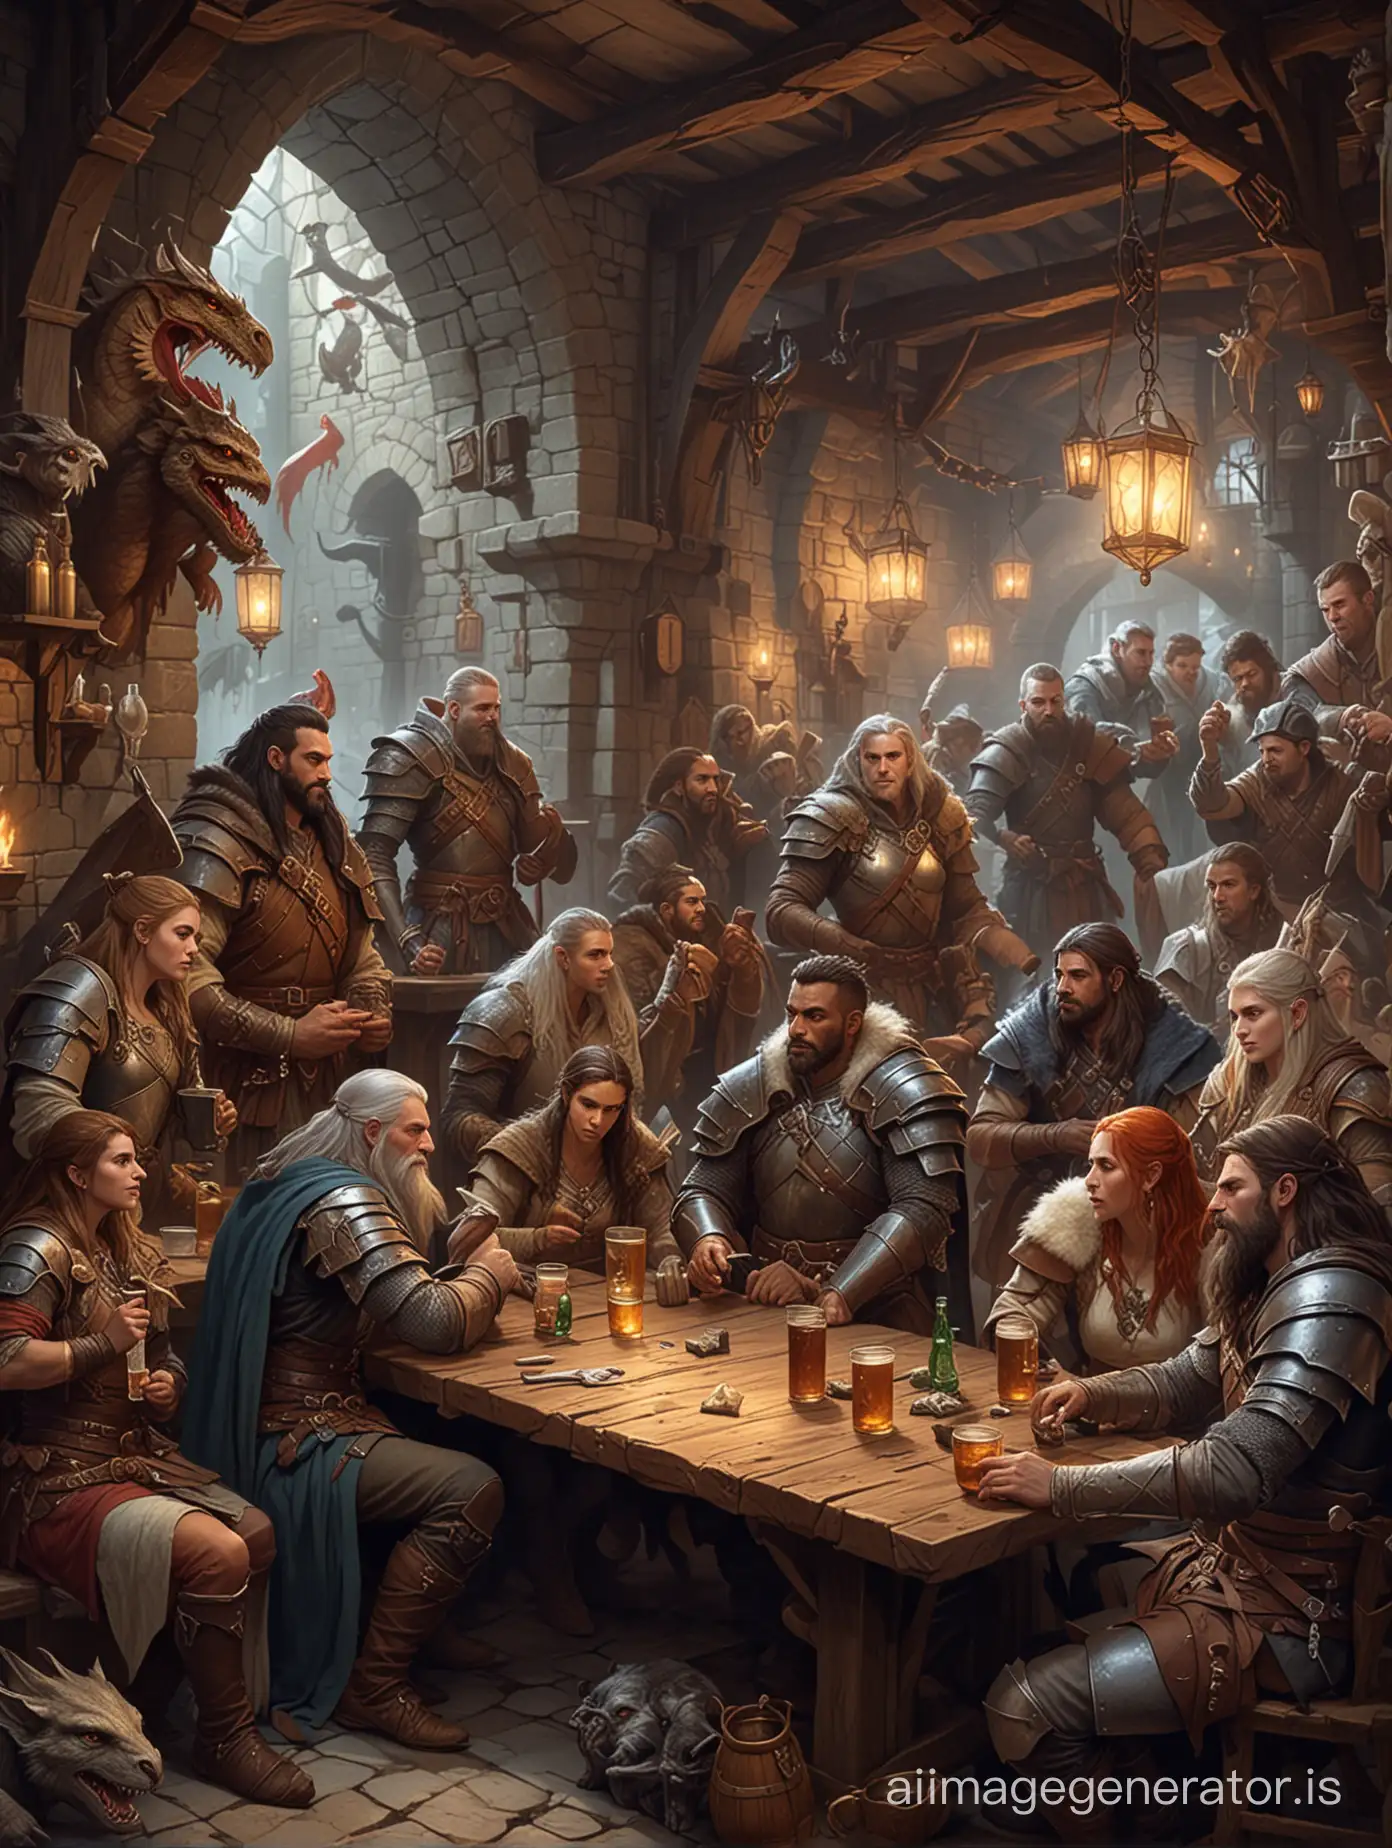 dungeons and dragons theme bar with many medieval people and creatures of different races sitting around drinking